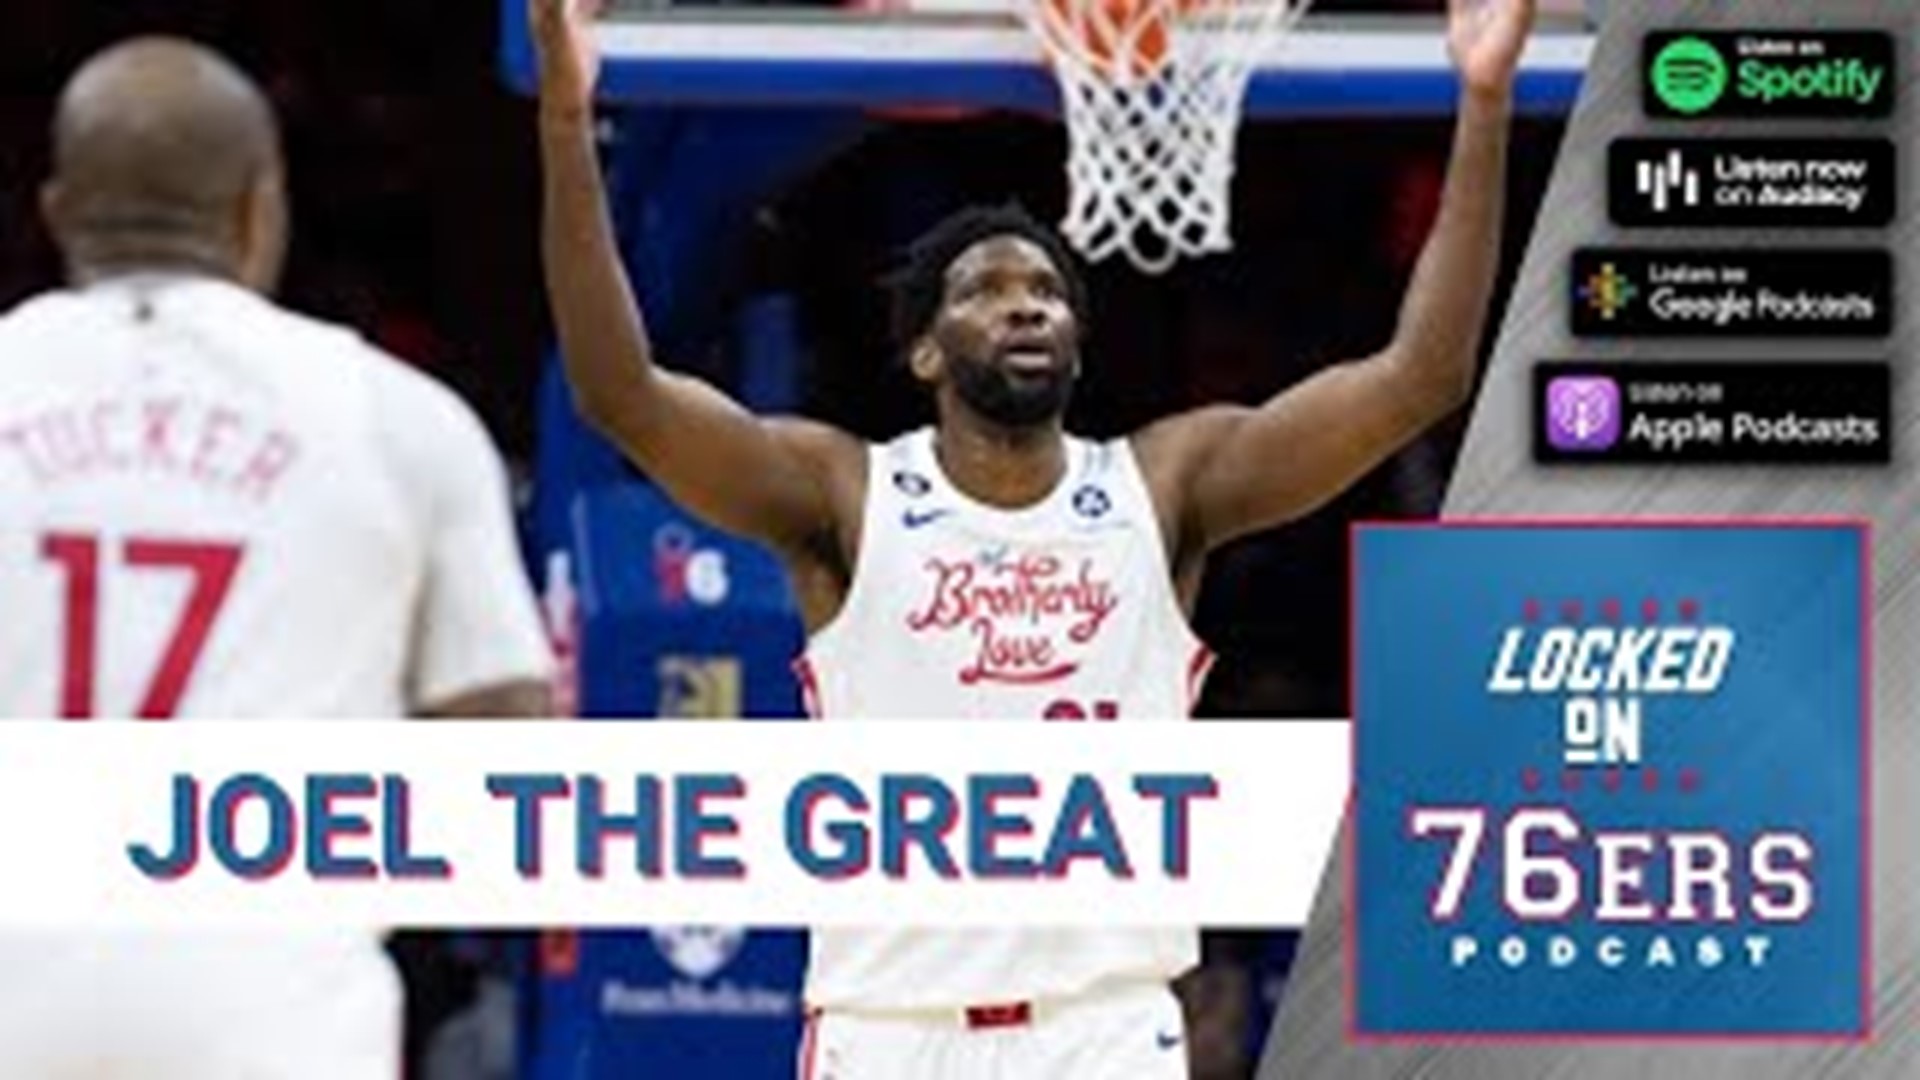 Devon Givens and Keith Pompey dissect Joel Embiid's big effort against the Utah Jazz.